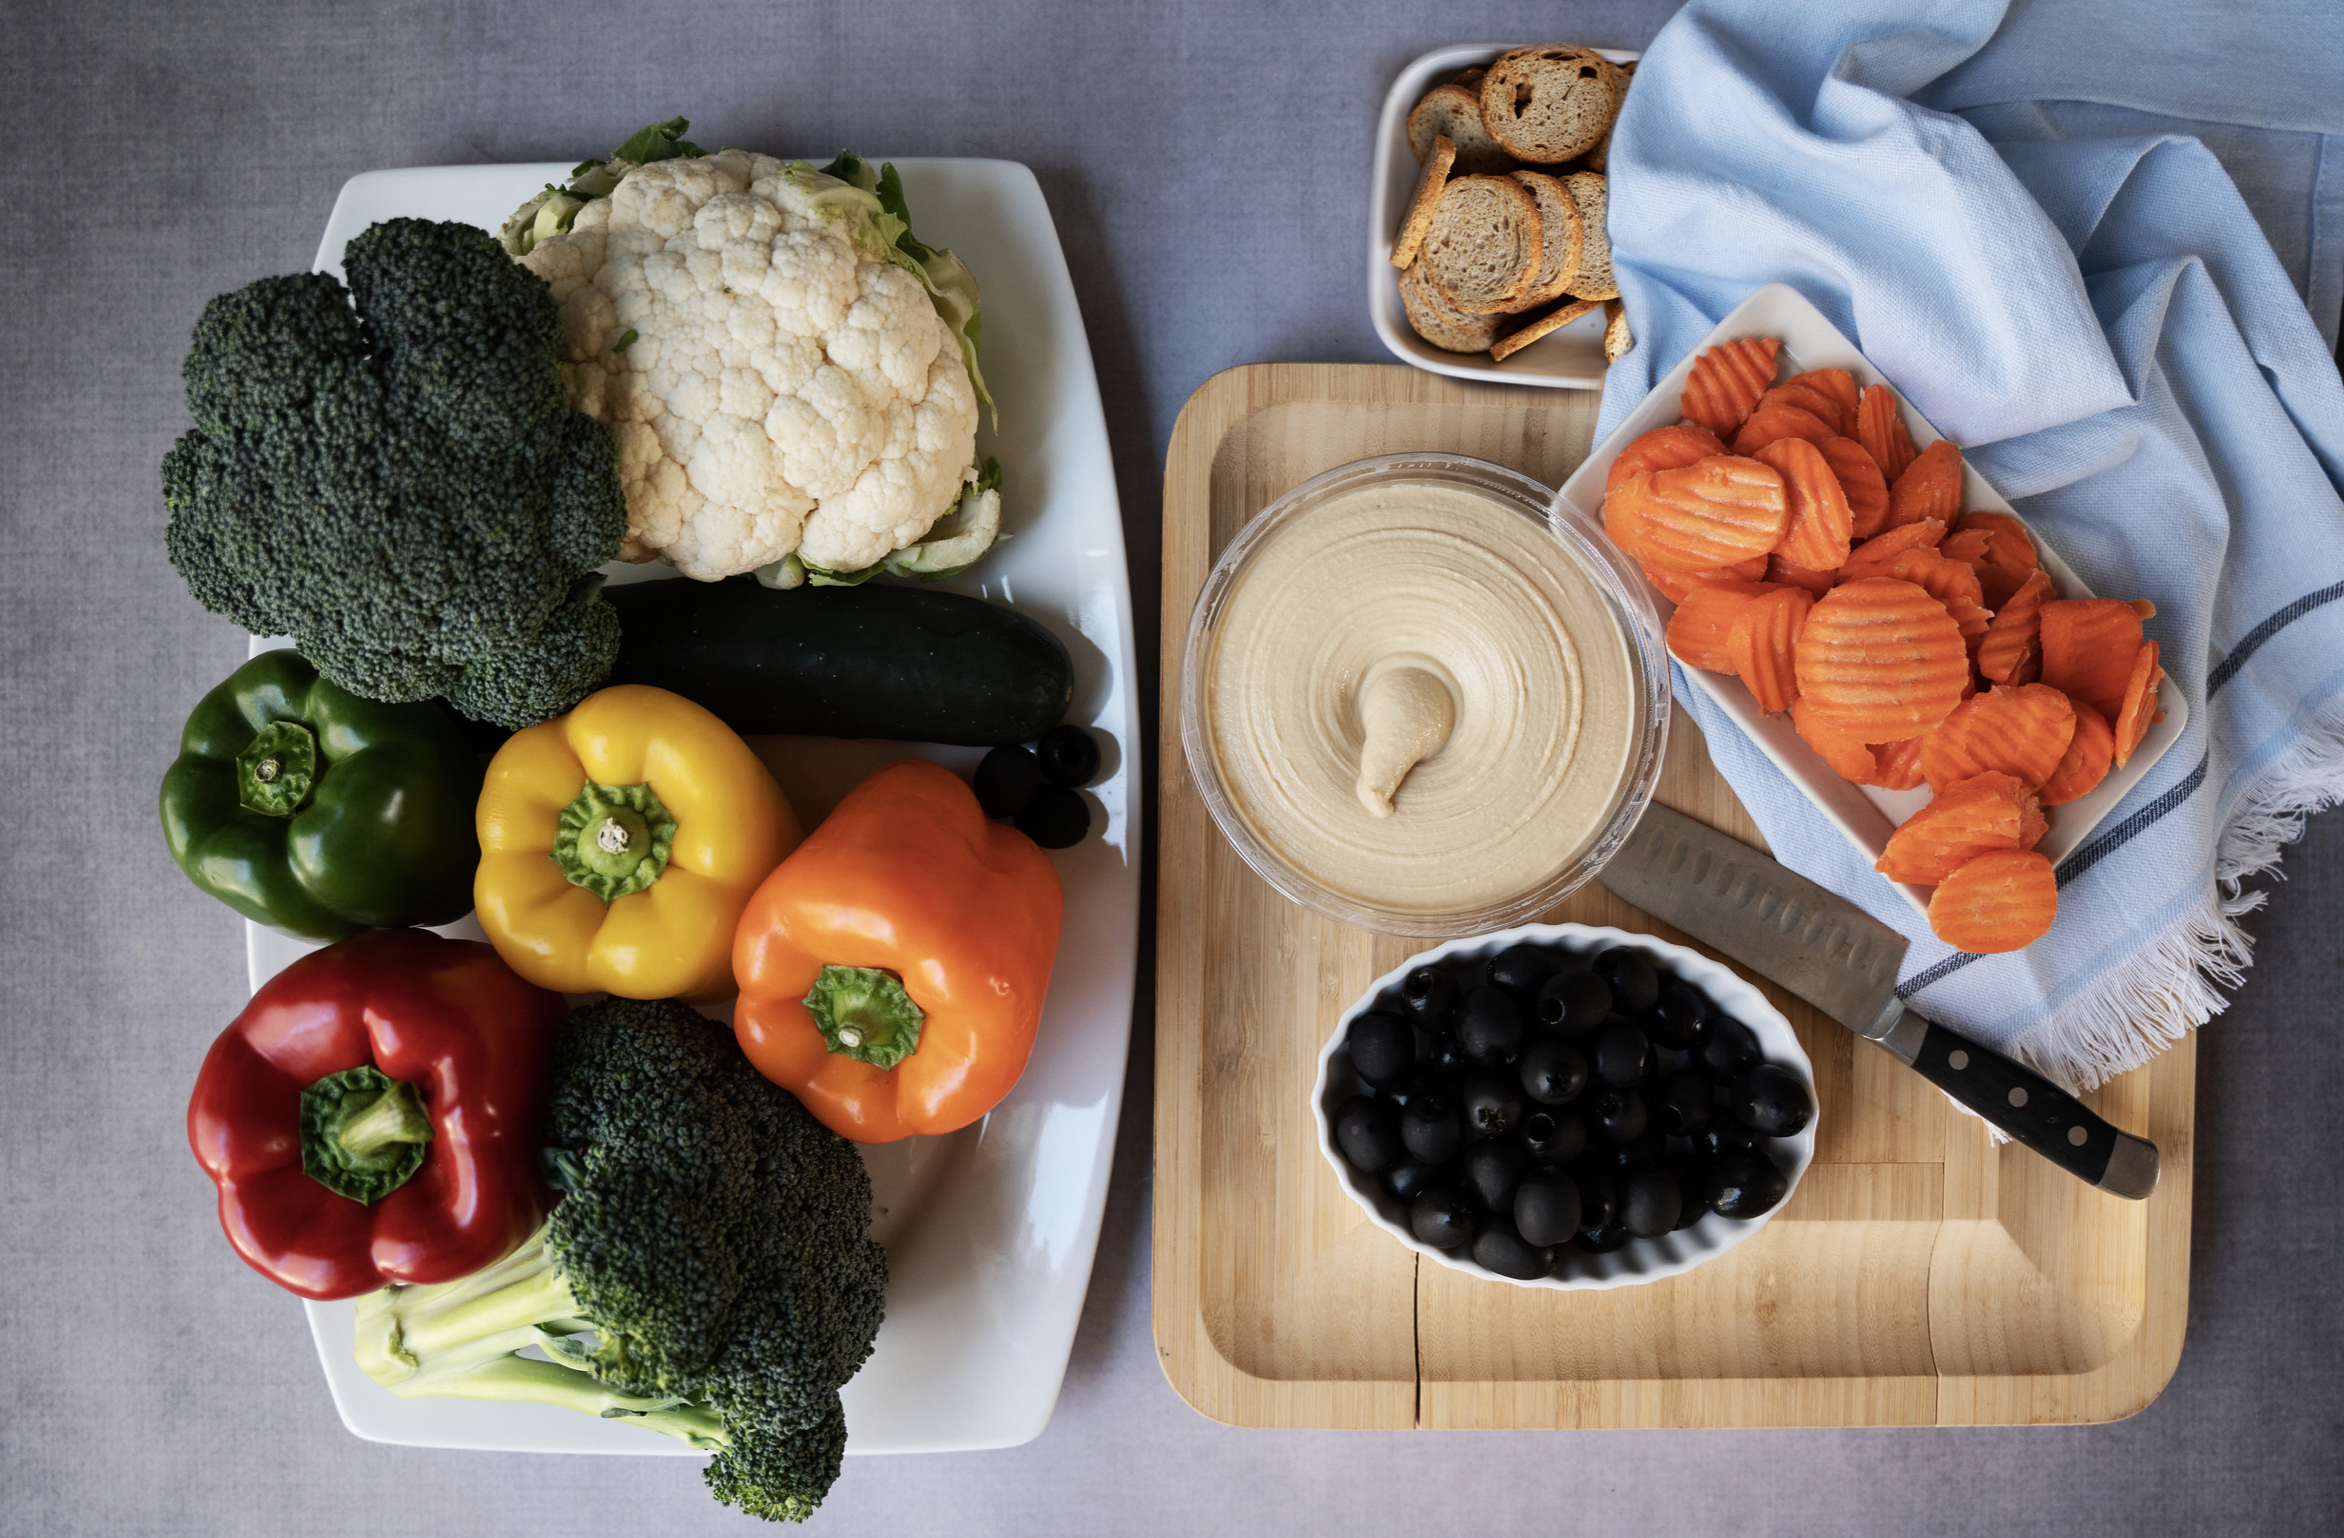 Overview of veggies for Leprechaun tray (bell peppers, broccoli, cauliflower, carrots, black olives) + hummus